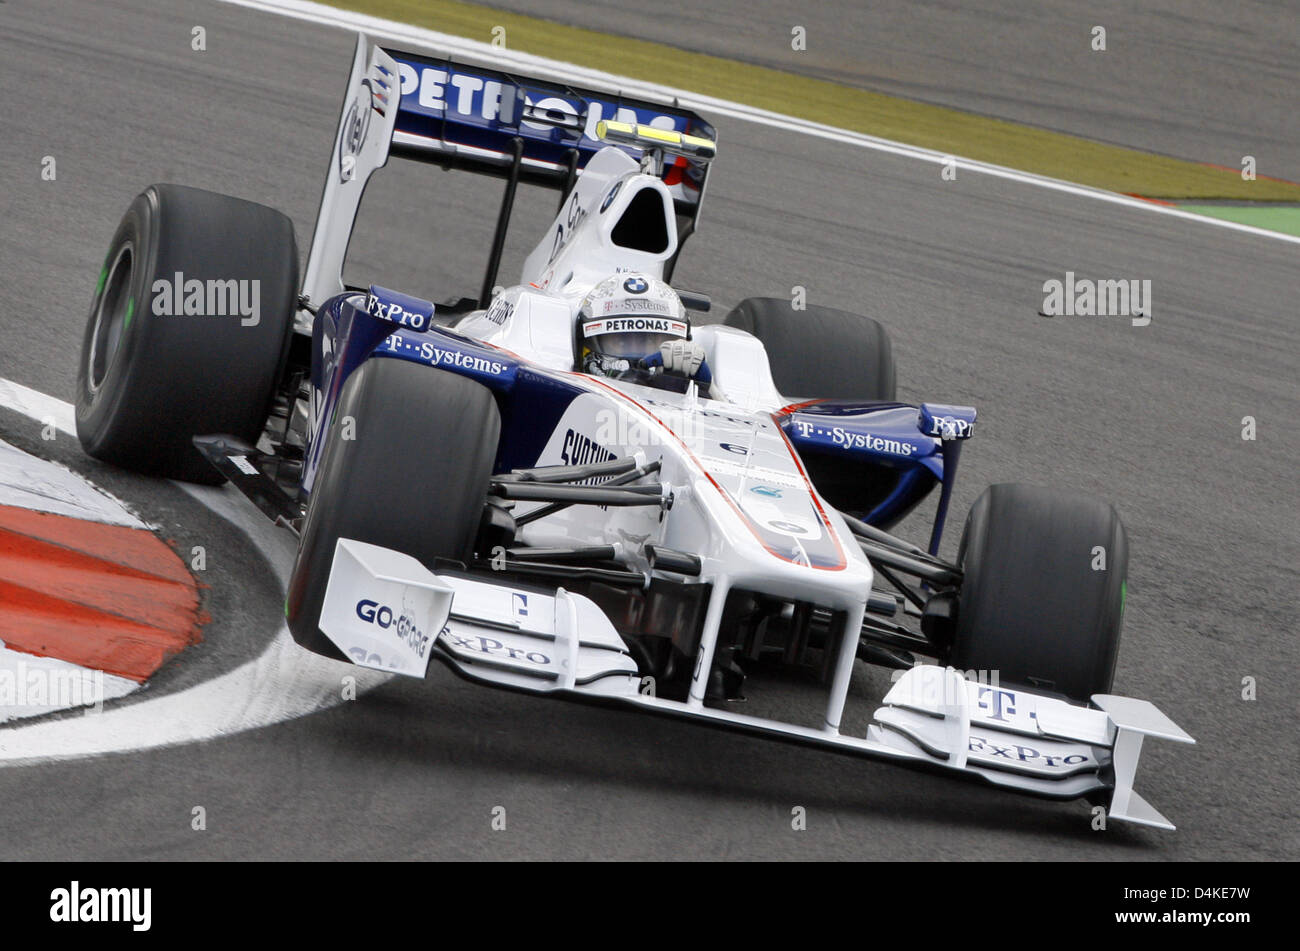 German Formula One driver Nick Heidfeld of BMW Sauber enters turn 1 during the first training session at the Nuerburgring, Germany, 10 July 2009. The Formula 1 Grand Prix of Germany takes place on 12 July. Photo: Roland Weihrauch Stock Photo